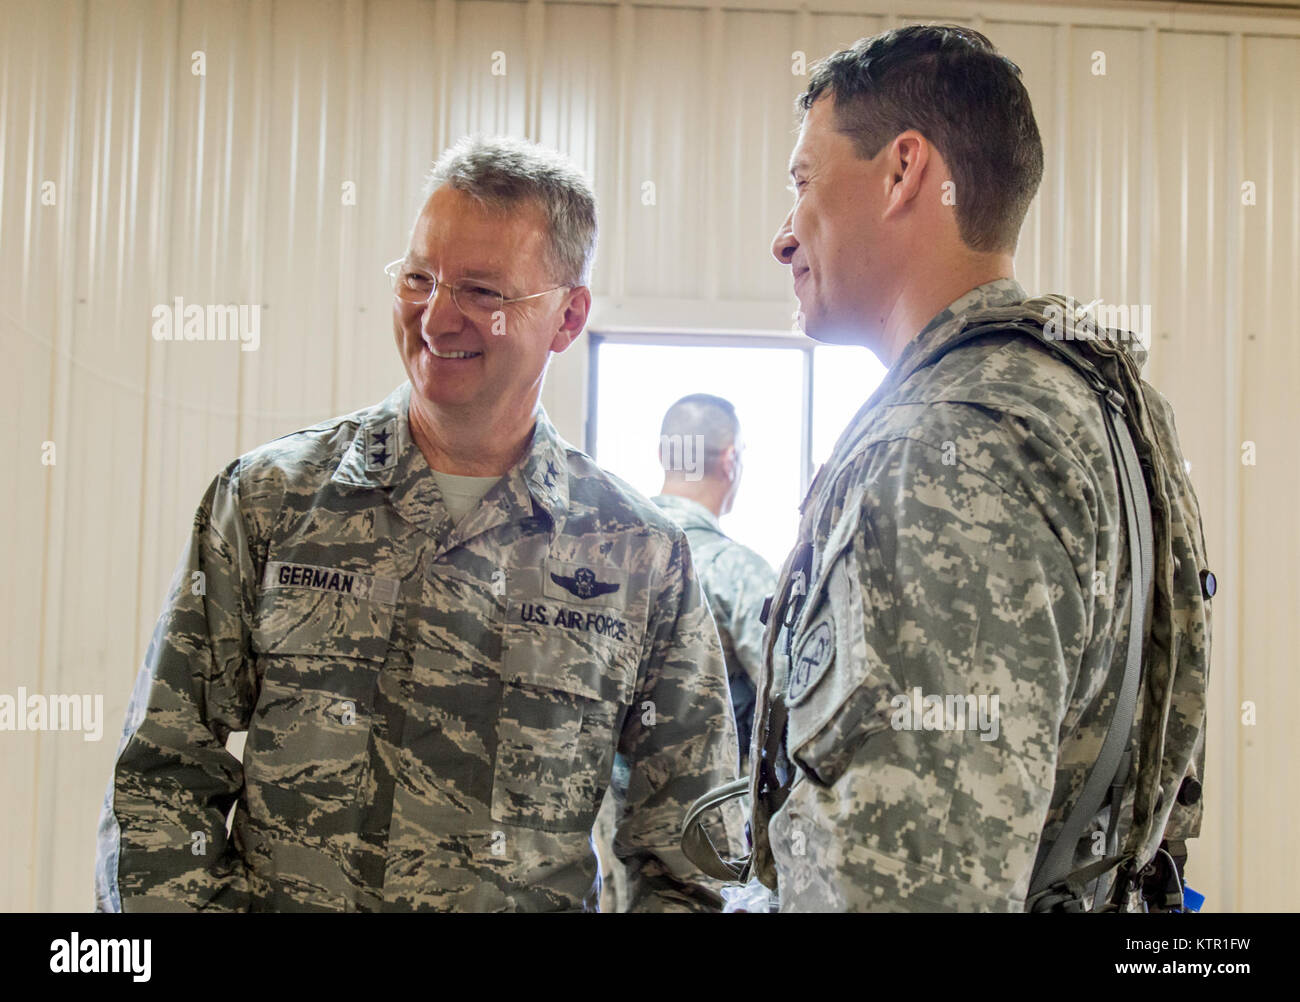 New York Air National Guard Maj. Gen. Anthony P. German, the Adjutant General of New York, chats with an officer following a mission brief at the Army’s Joint Rotational Training Center, Ft. Polk, La., July 16, 2016.   More than 3,000 New York Army National Guard Soldiers deployed to Fort Polk, Louisiana for a three-week exercise at the Army’s Joint Readiness Training Center, July 9-30, 2016. (U.S. Army National Guard photo by Sgt. Michael Davis) Stock Photo